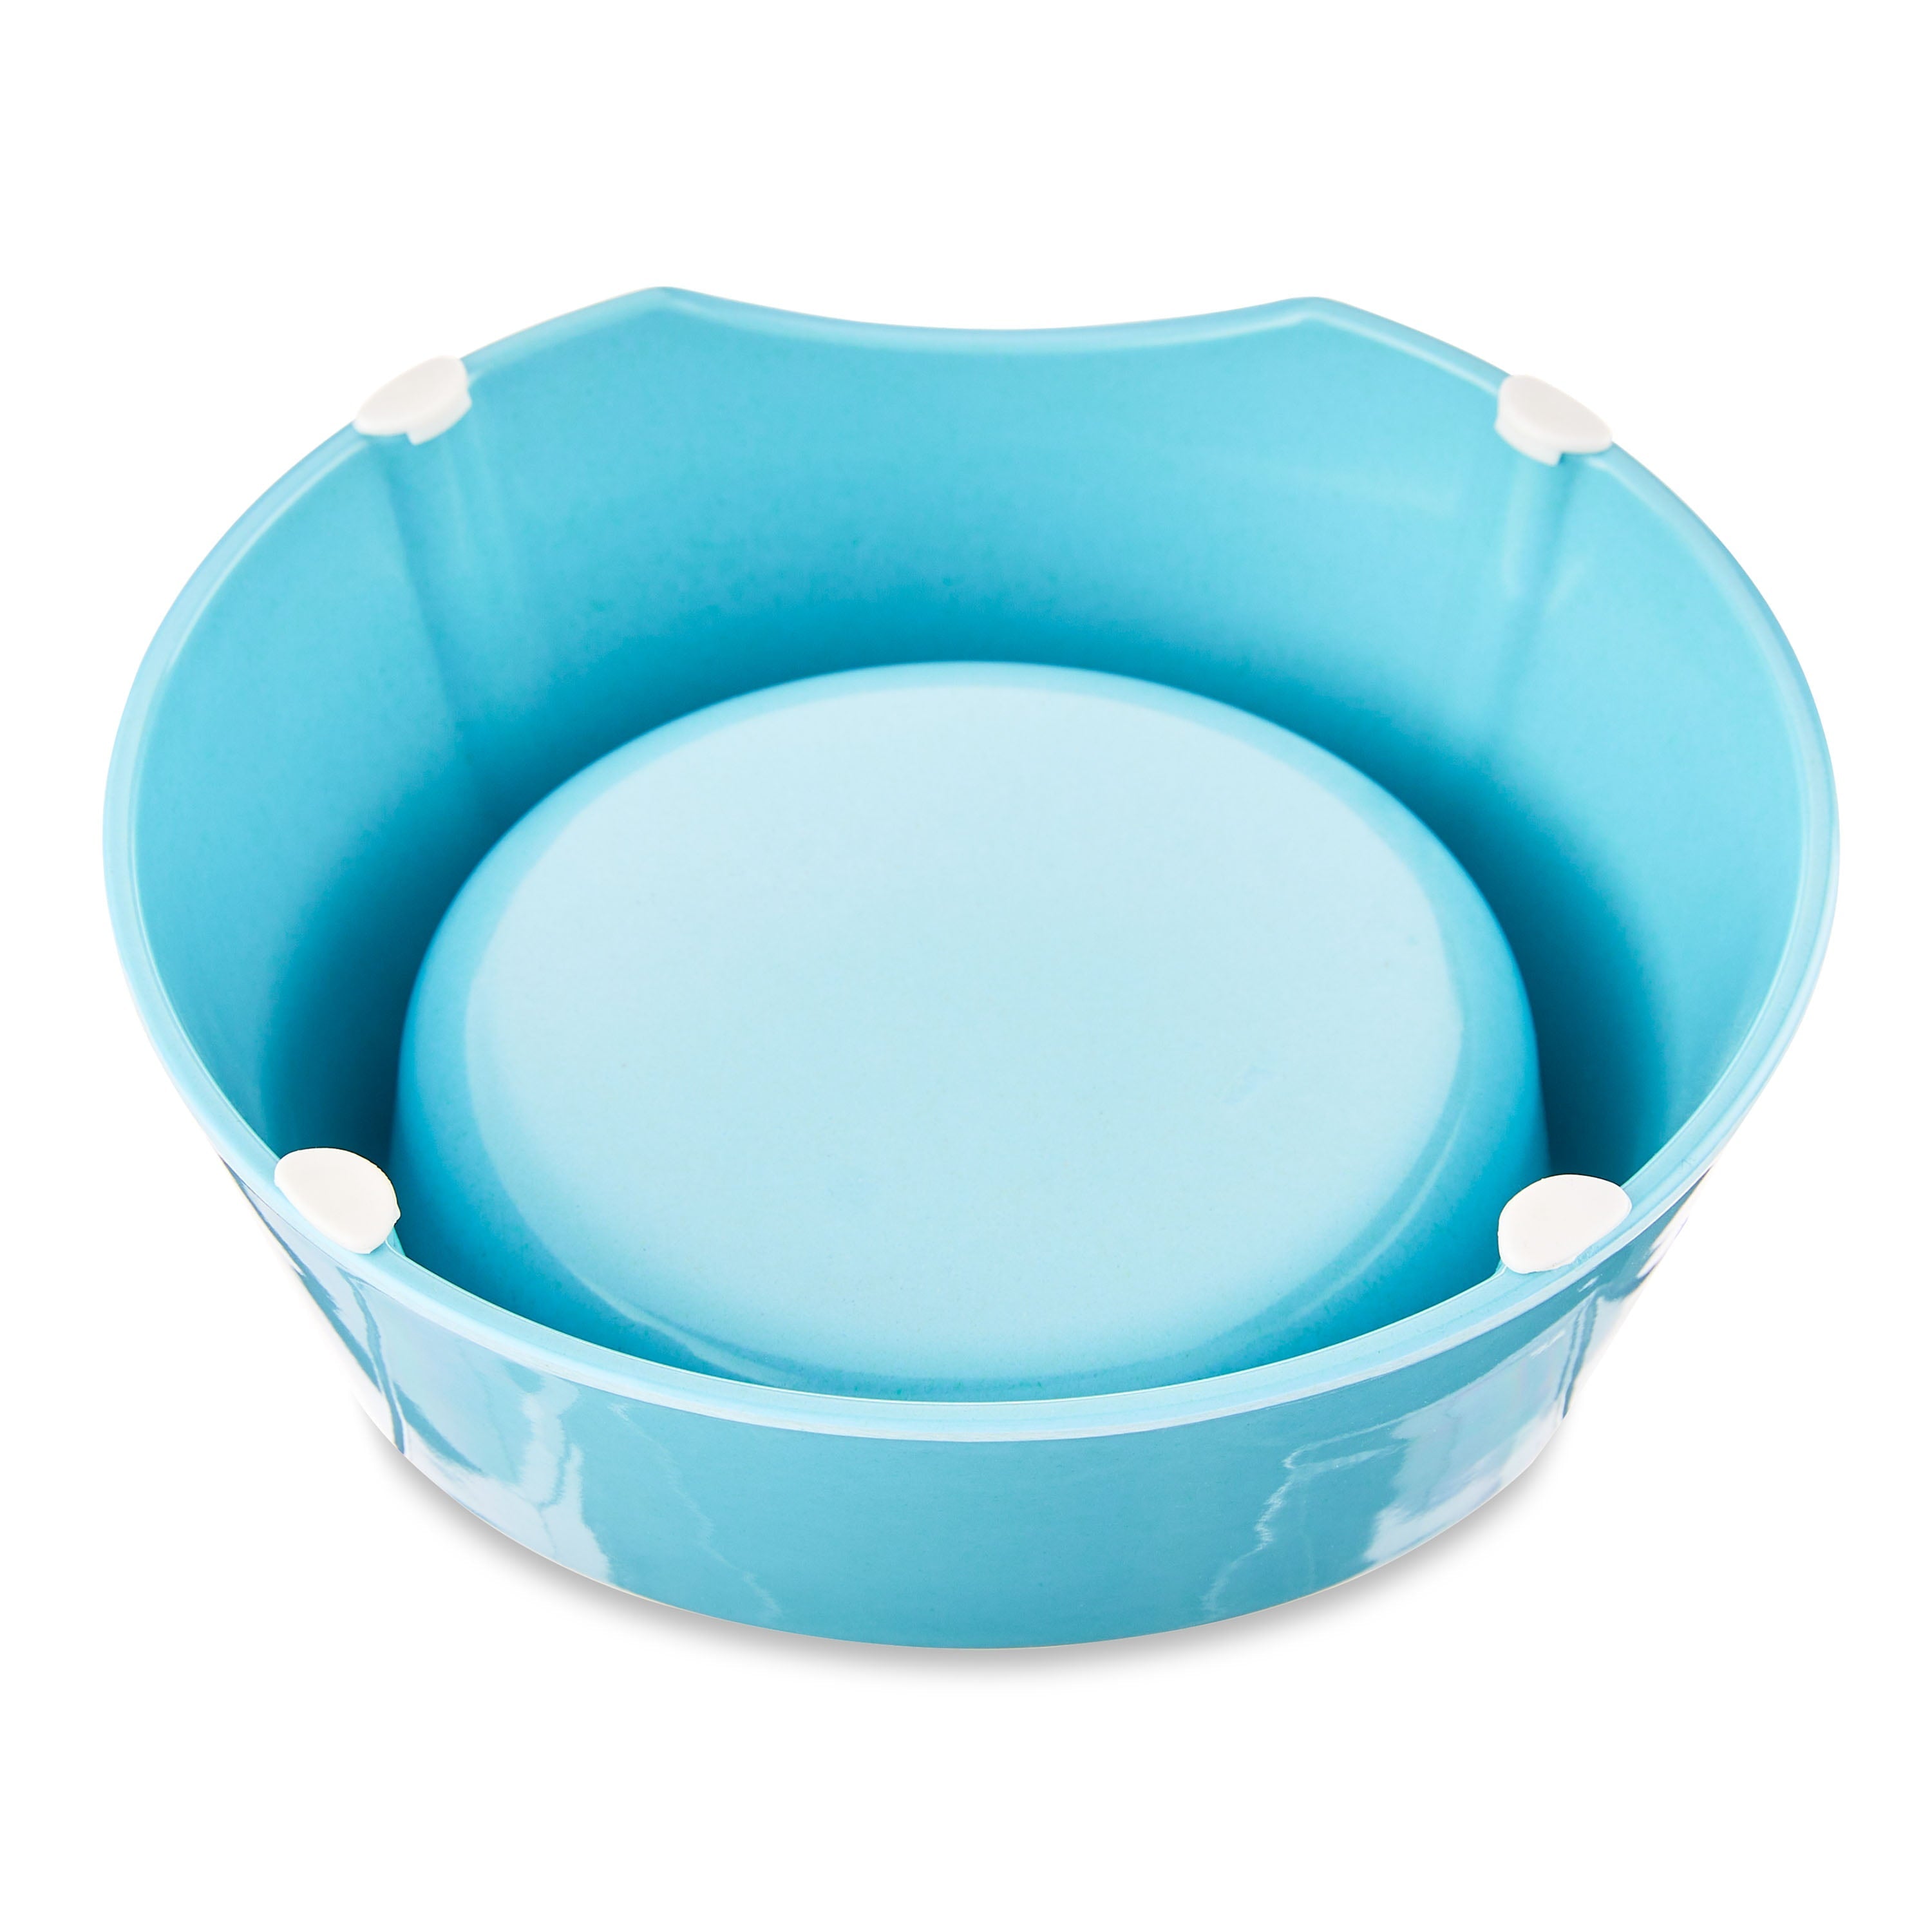 Wholesale prices with free shipping all over United States Vibrant Life Raised High Back Pet Bowl, Teal, Small, 8 oz - Steven Deals